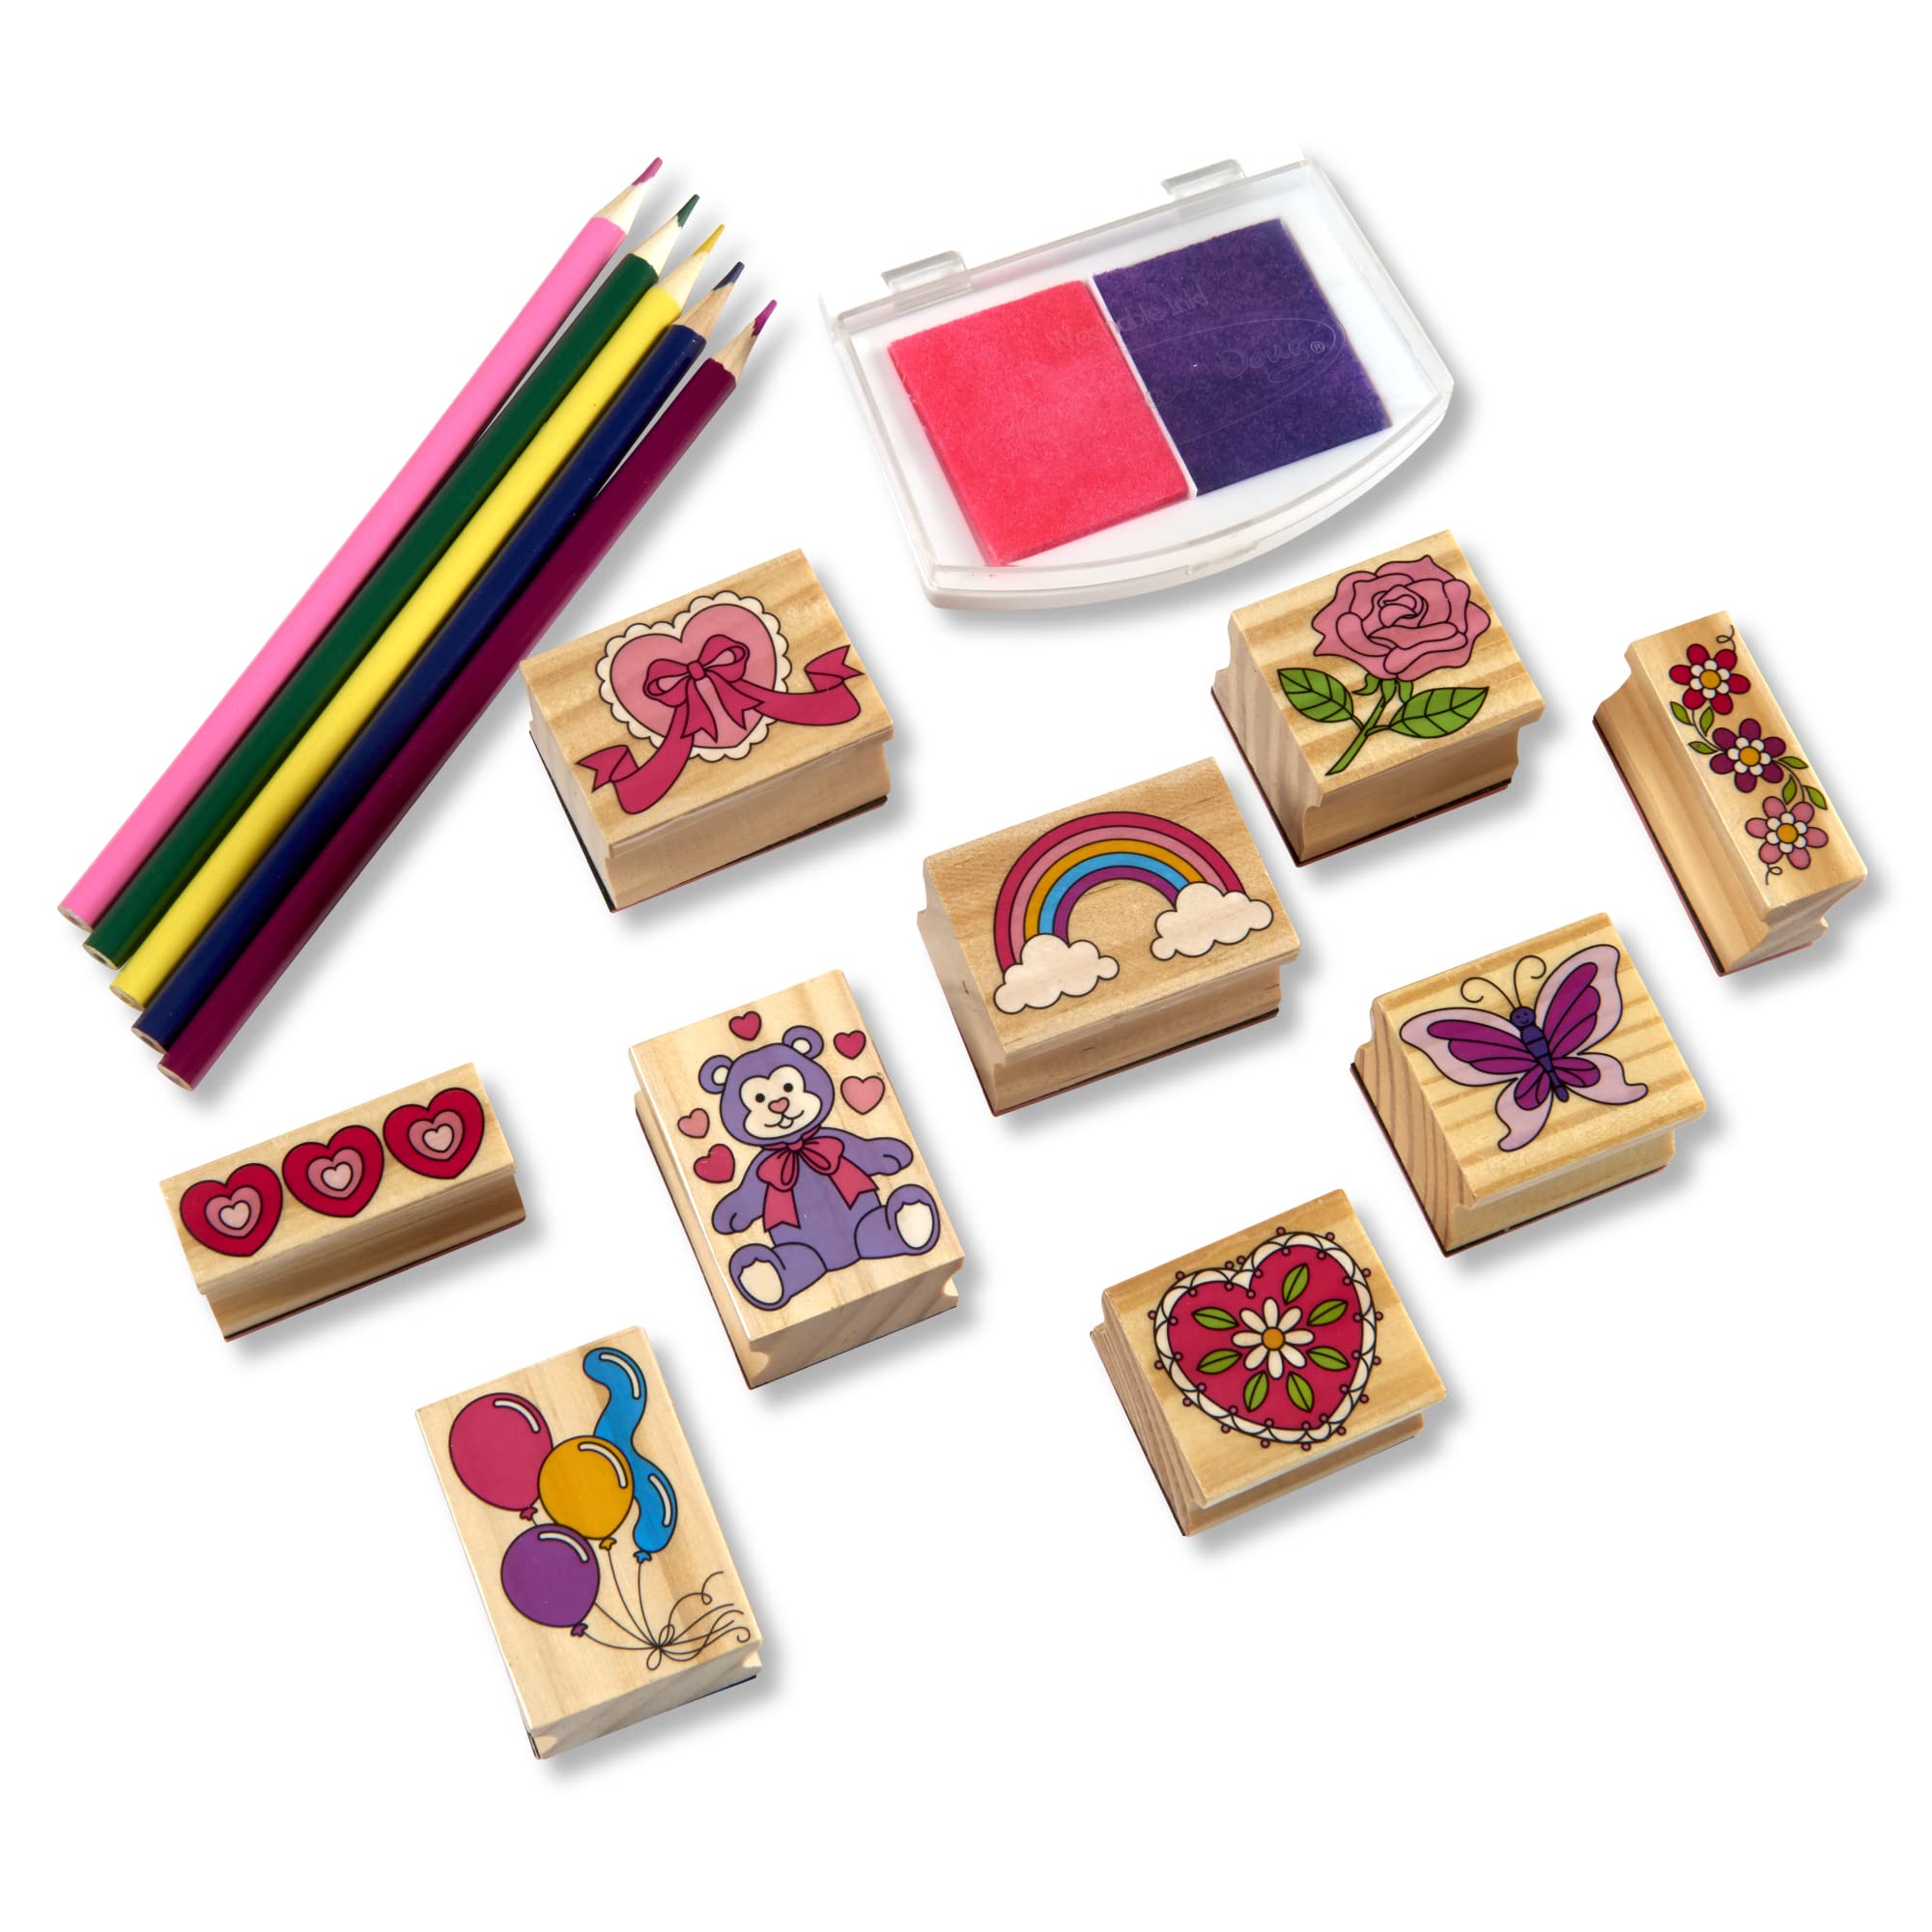 Melissa & Doug Wooden Stamp Set: Friendship - 9 Stamps, 5 Colored Pencils, and 2-Color Stamp Pad - Kids Art Projects, Stamps With Washable Ink, Hearts and Rainbows Wooden Stamps For Kids Ages 4+